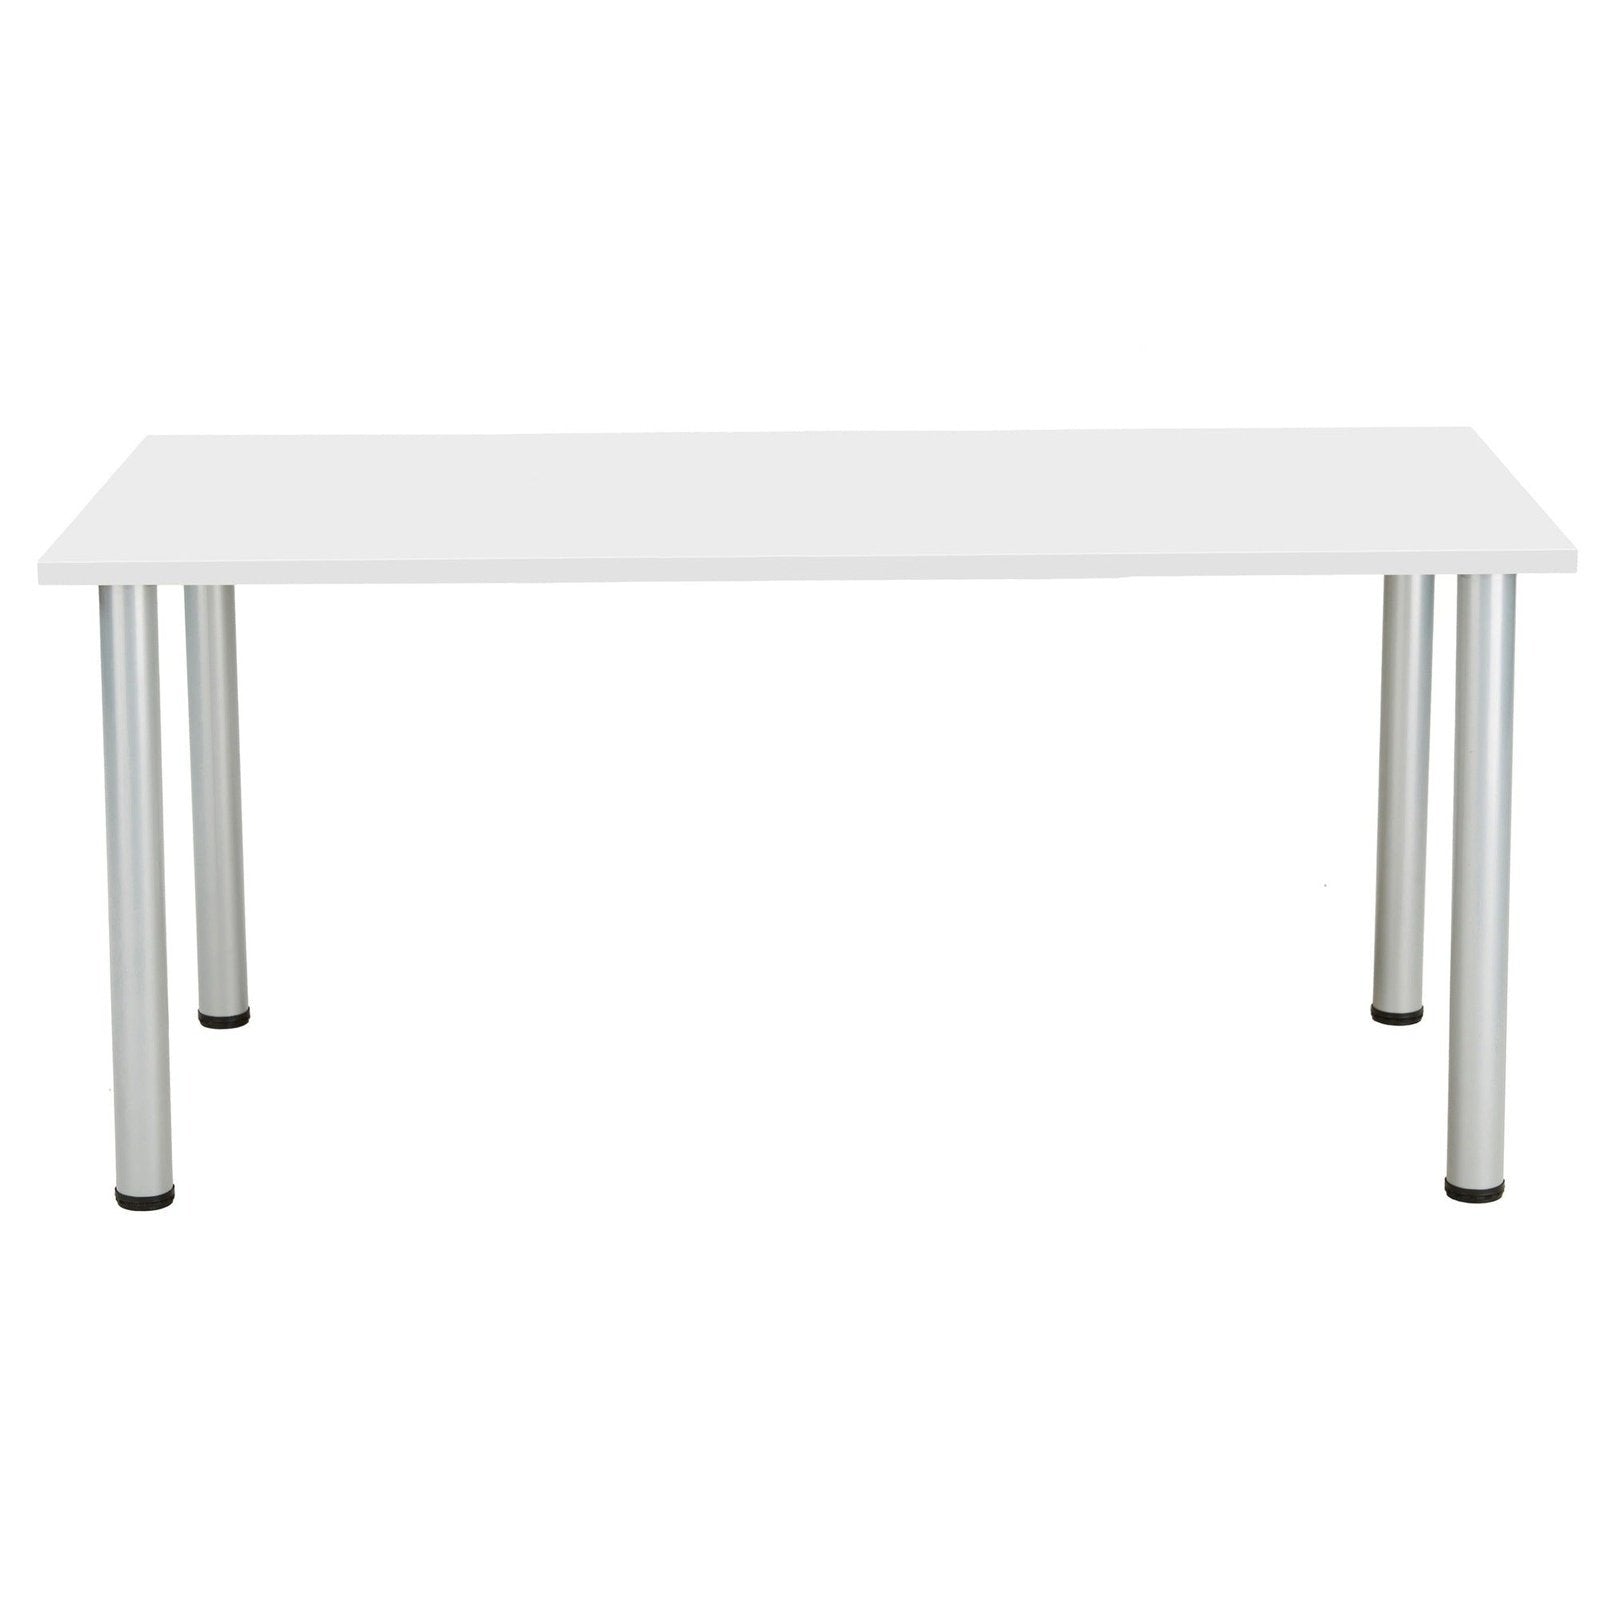 One Fraction Plus Straight 1800mm Meeting Table